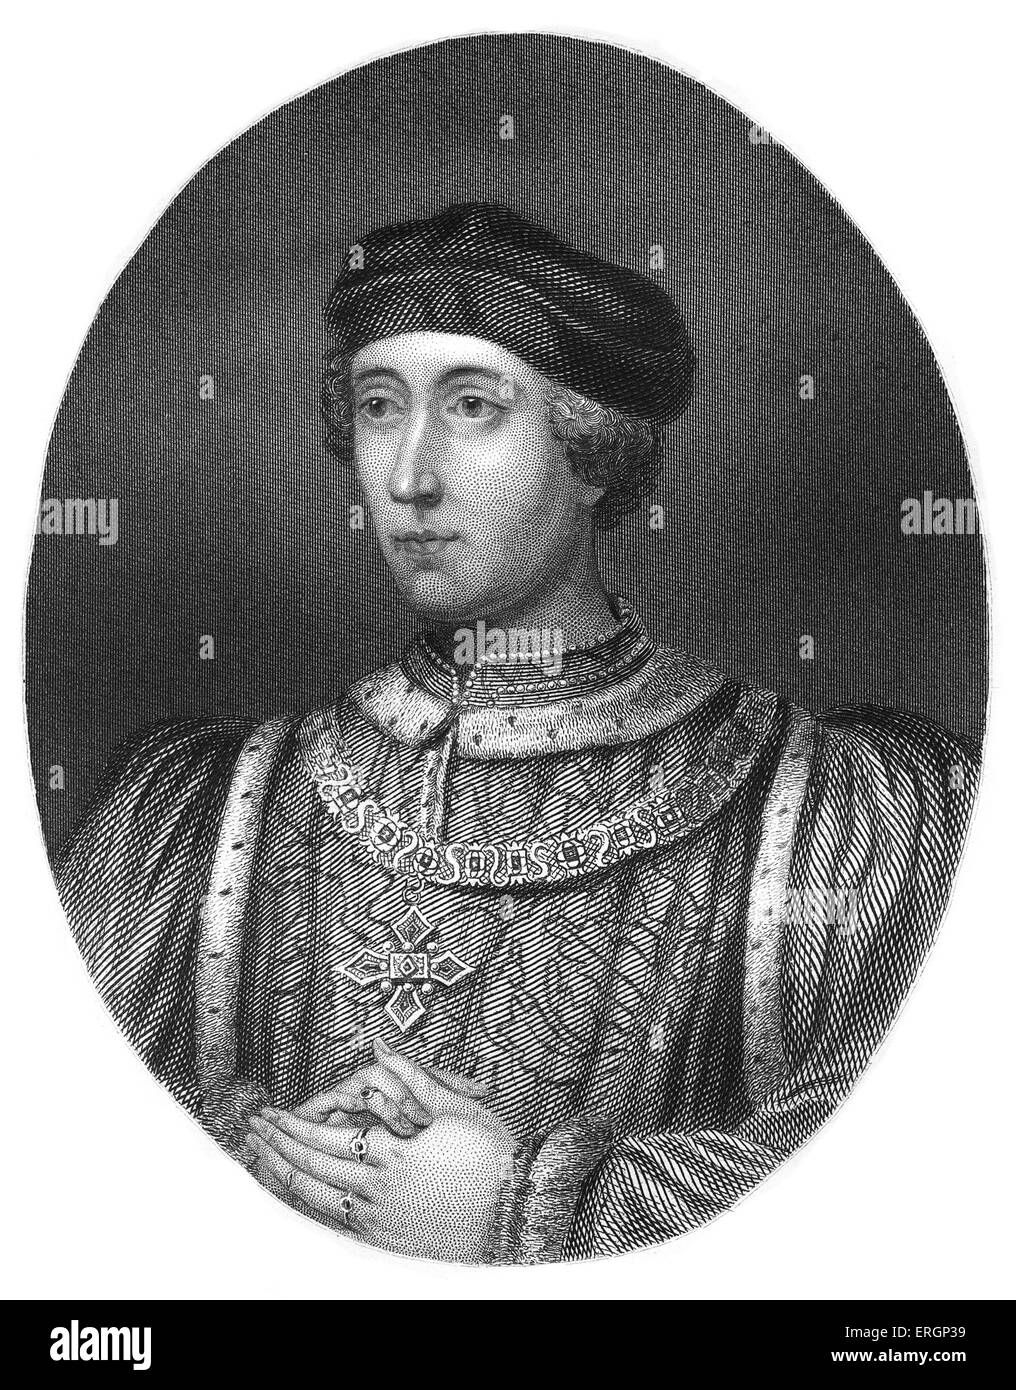 Henry VI, portrait. King of England 1422 to 1461 and again from 1470 to 1471, and disputed King of France from 1422 to 1453. 6 Stock Photo